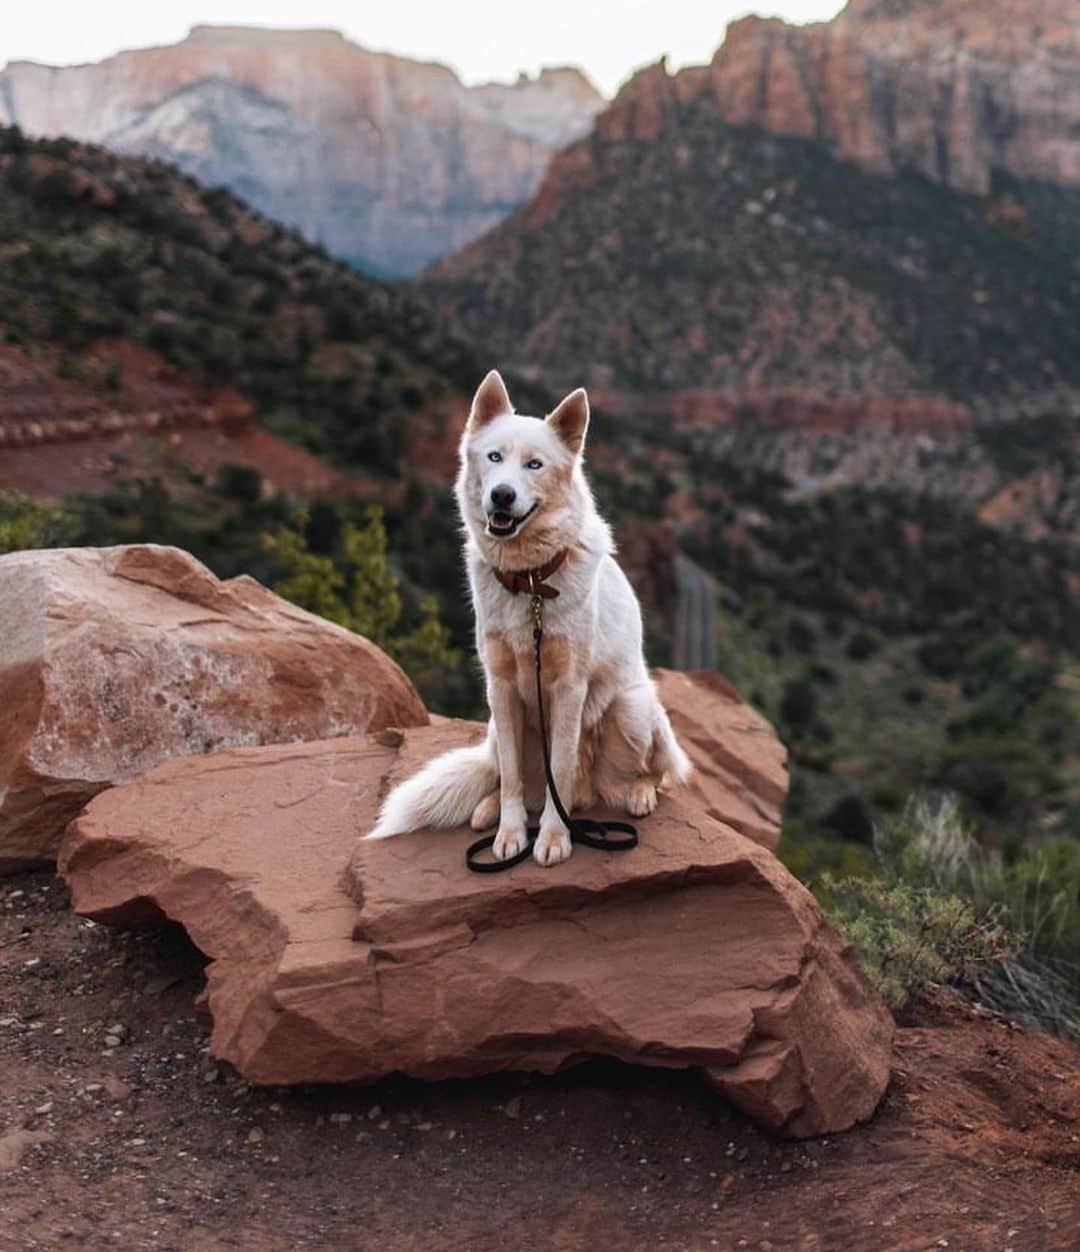 Bolt and Keelのインスタグラム：「Meet Jasper! 🐾  This adventure pup is currently traveling around North America with his mom!🌎  @adventrapets ➡️ @jasperexplores_  —————————————————— Follow @adventrapets to meet cute, brave and inspiring adventure pets from all over the world! 🌲🐶🐱🌲  • TAG US IN YOUR POSTS to get your little adventurer featured! #adventrapets ——————————————————」